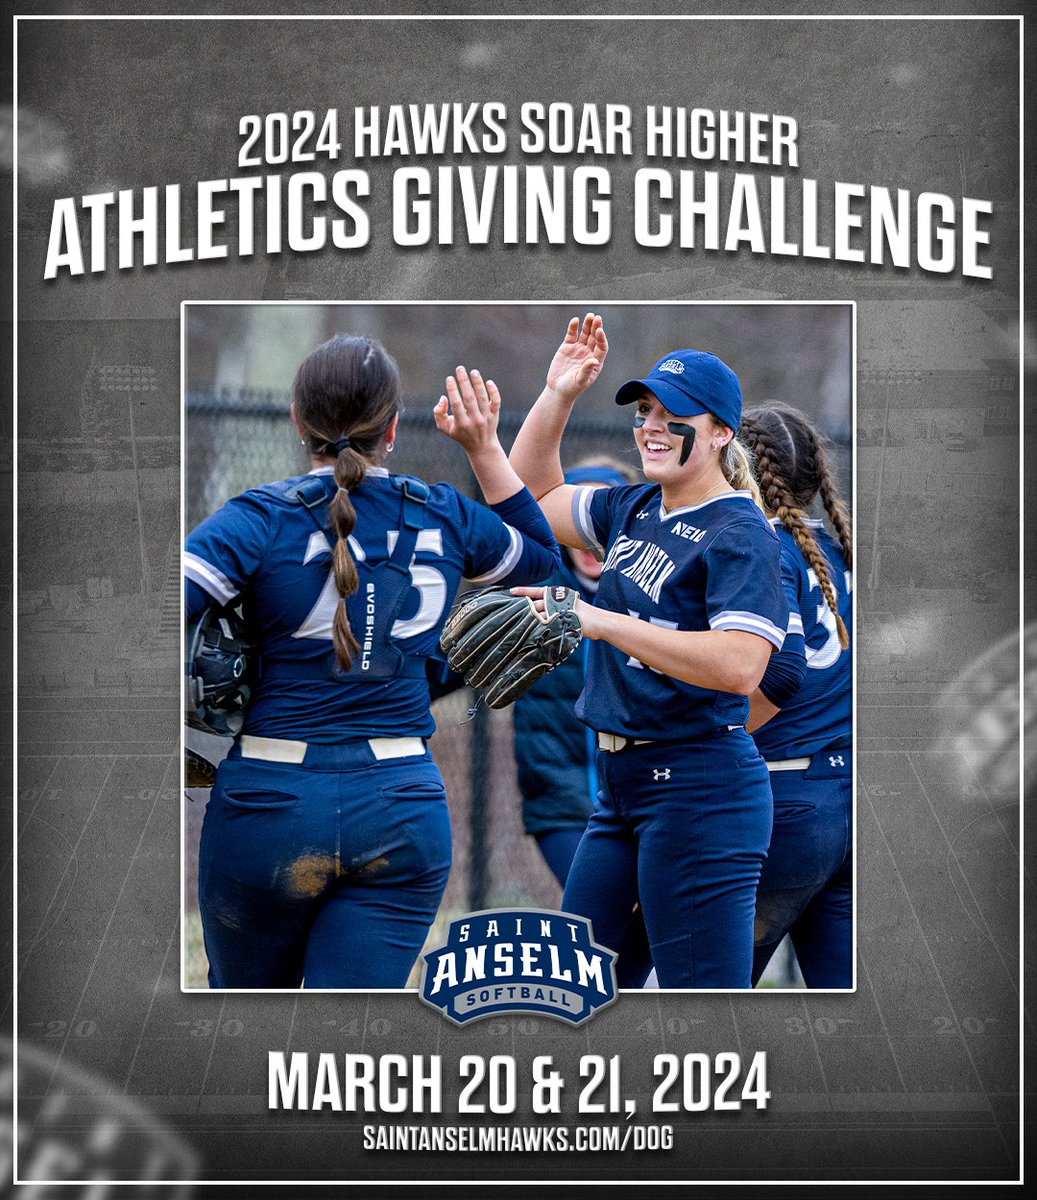 The 2024 #HawksSoarHigher Athletics Challenge is underway! Support our program by making a donation now!⤵️ Donate Here: saintanselmhawks.com/dog